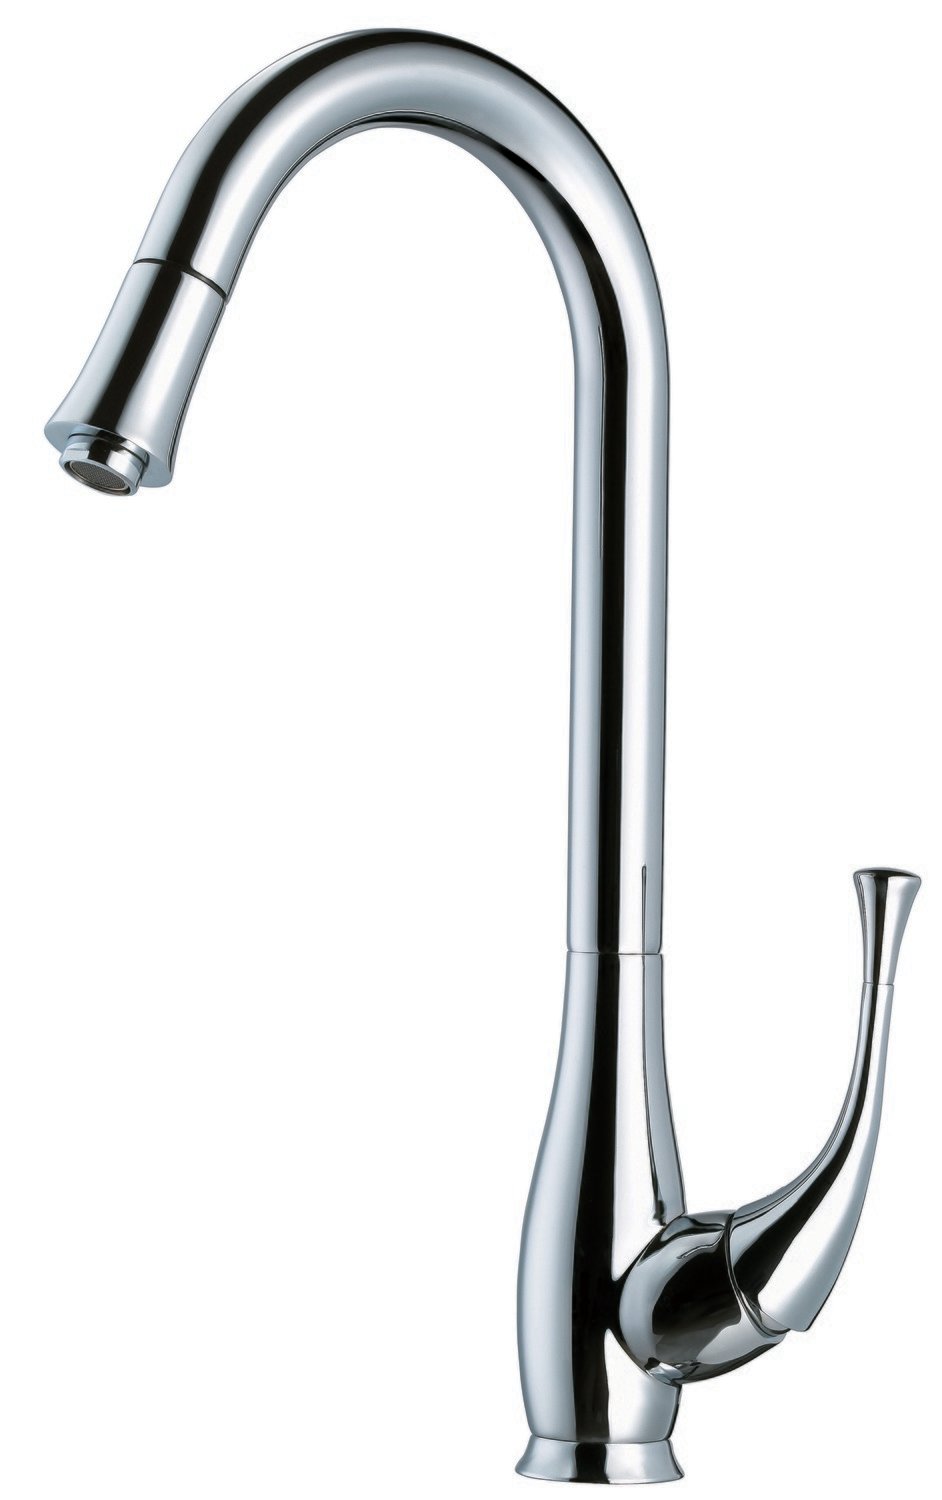 Single-lever pull-down spray sink mixer